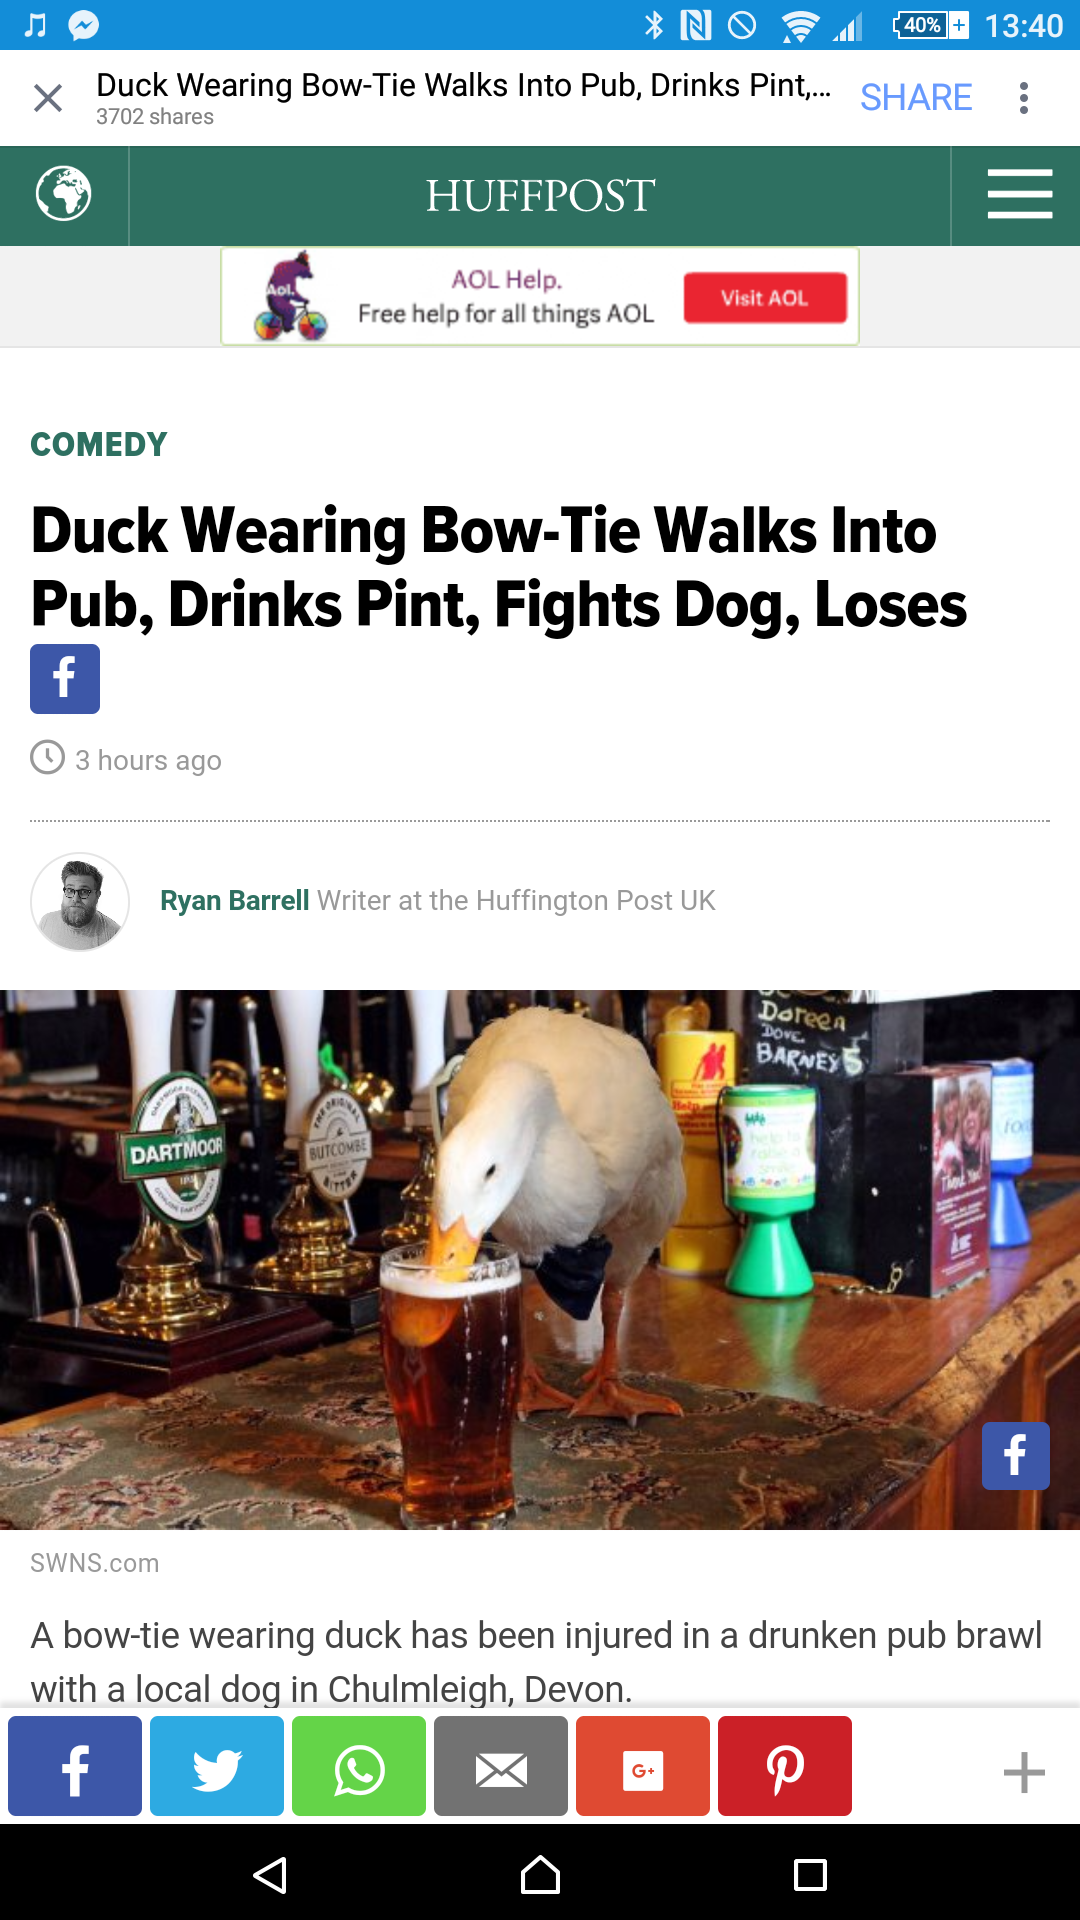 duck wearing bow tie walks into pub - Un Ca Duck Wearing Bow Tie Walks Into Pub, Drinks Pint. Huffpost Aol He Free help for things Aol Wa Comedy Duck Wearing Bow Tie Walks Into Pub, Drinks Pint, Fights Dog, Loses Ryan Burrell Wetter at the buffington Post